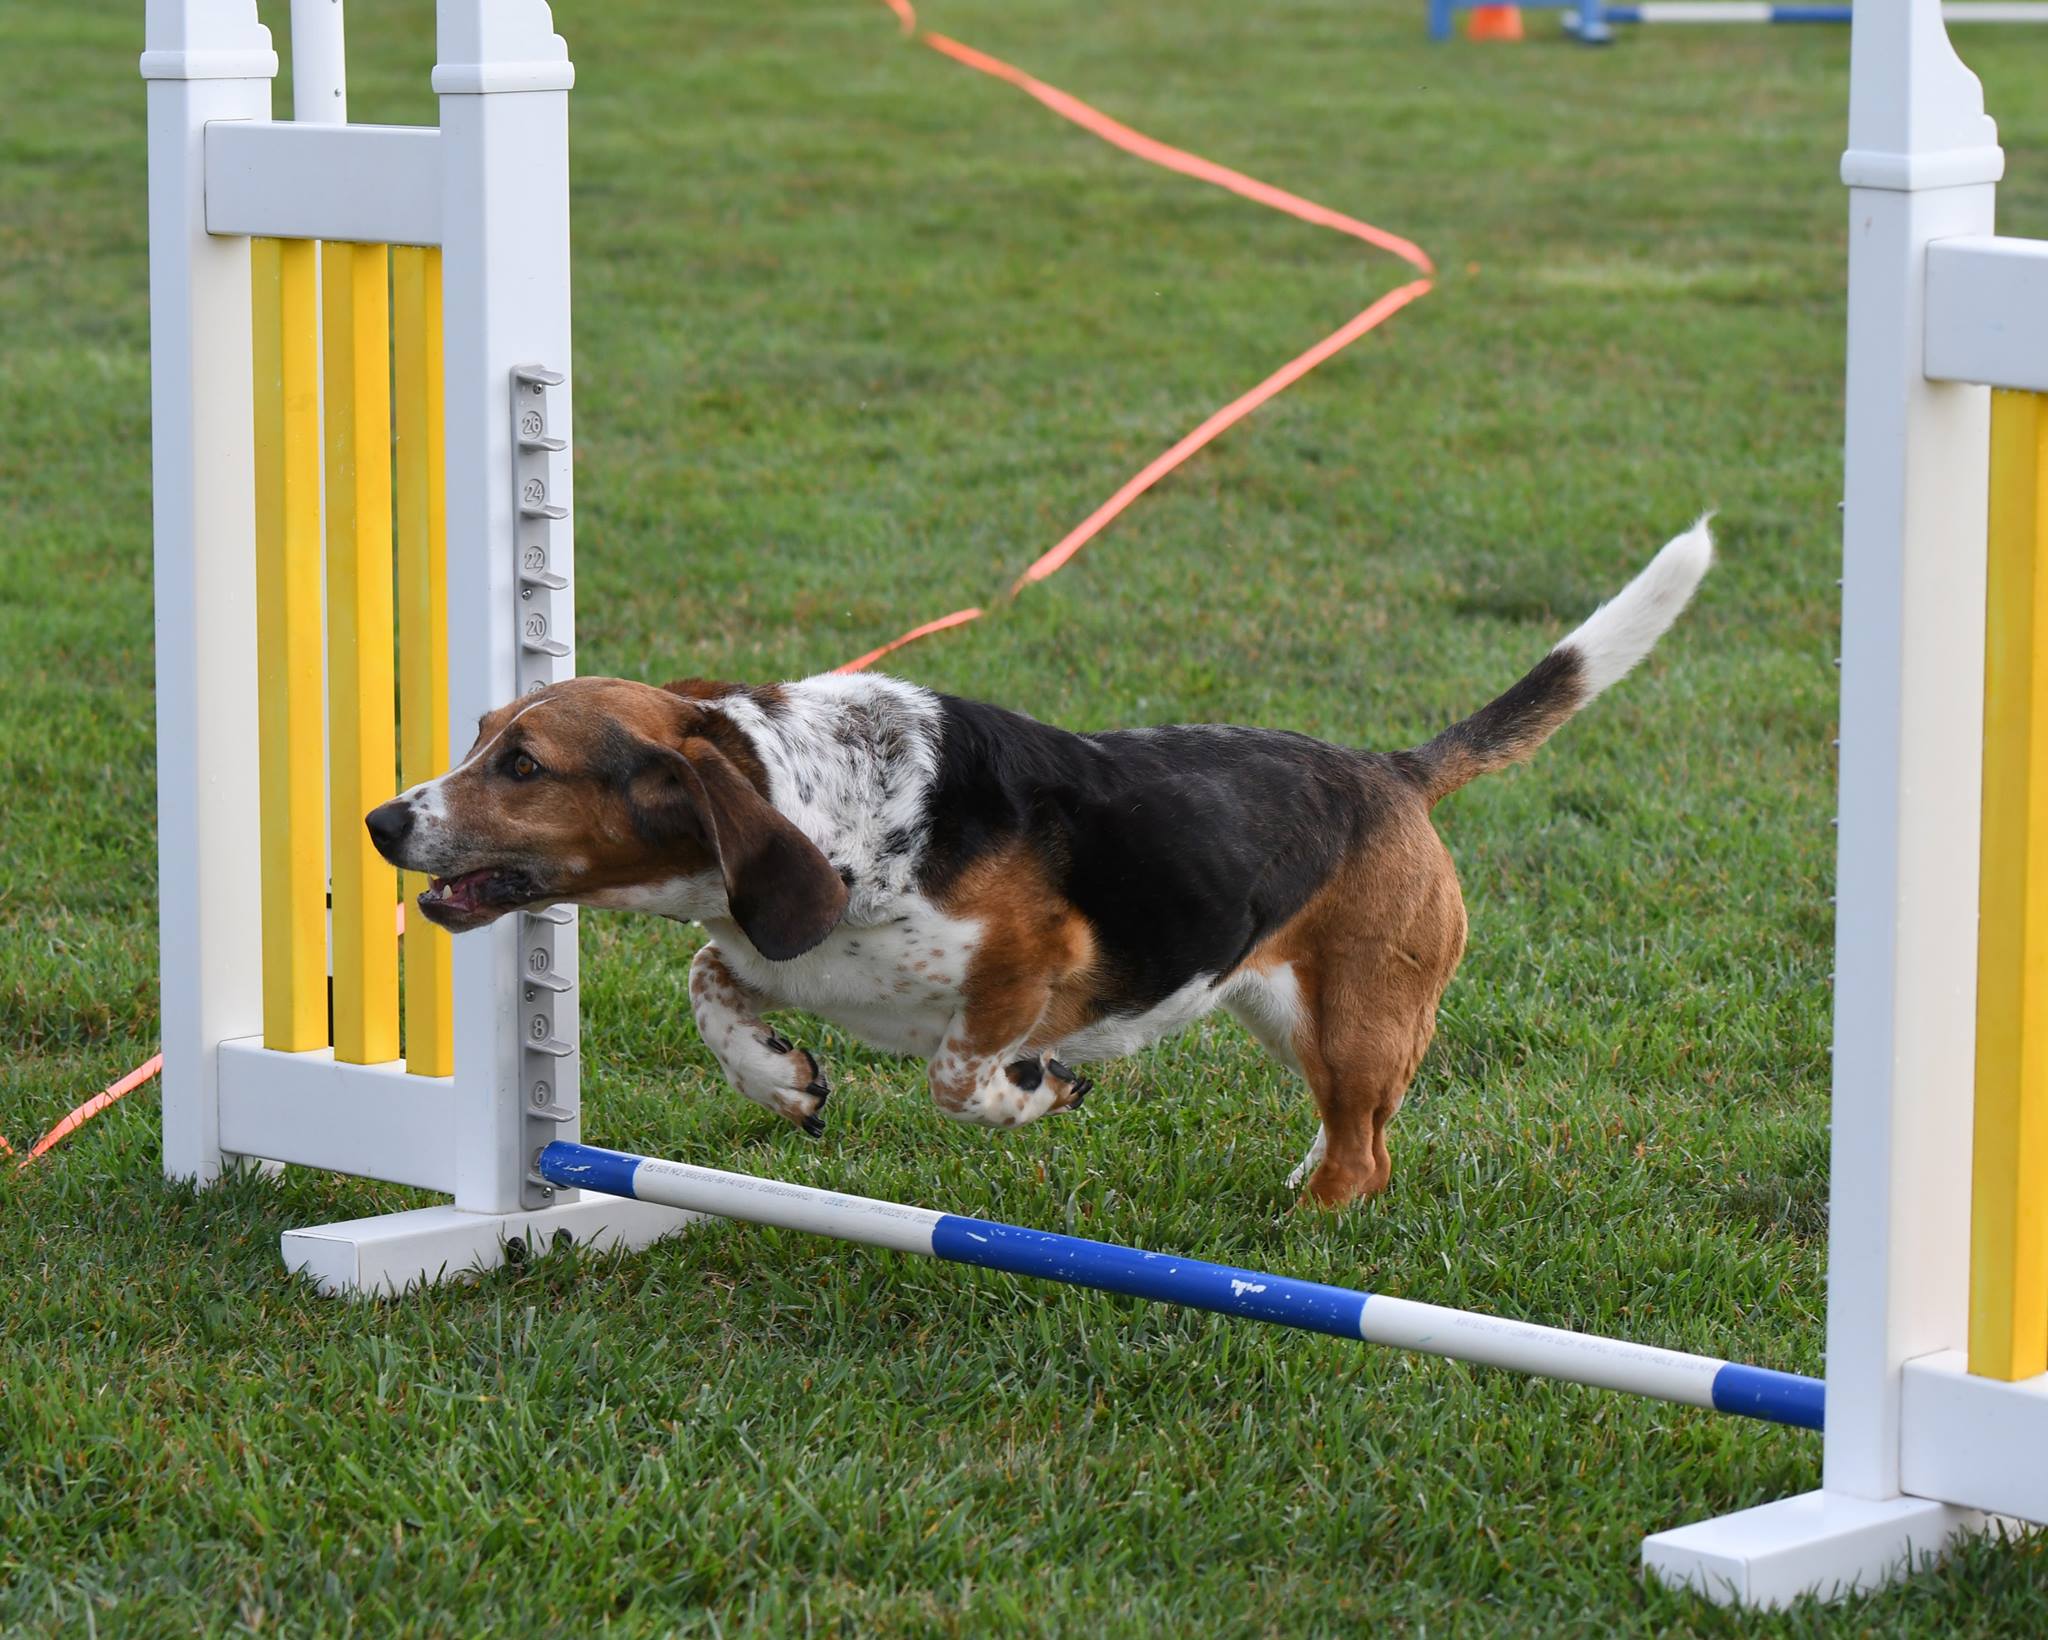 A Basset Hound jumping over the fence